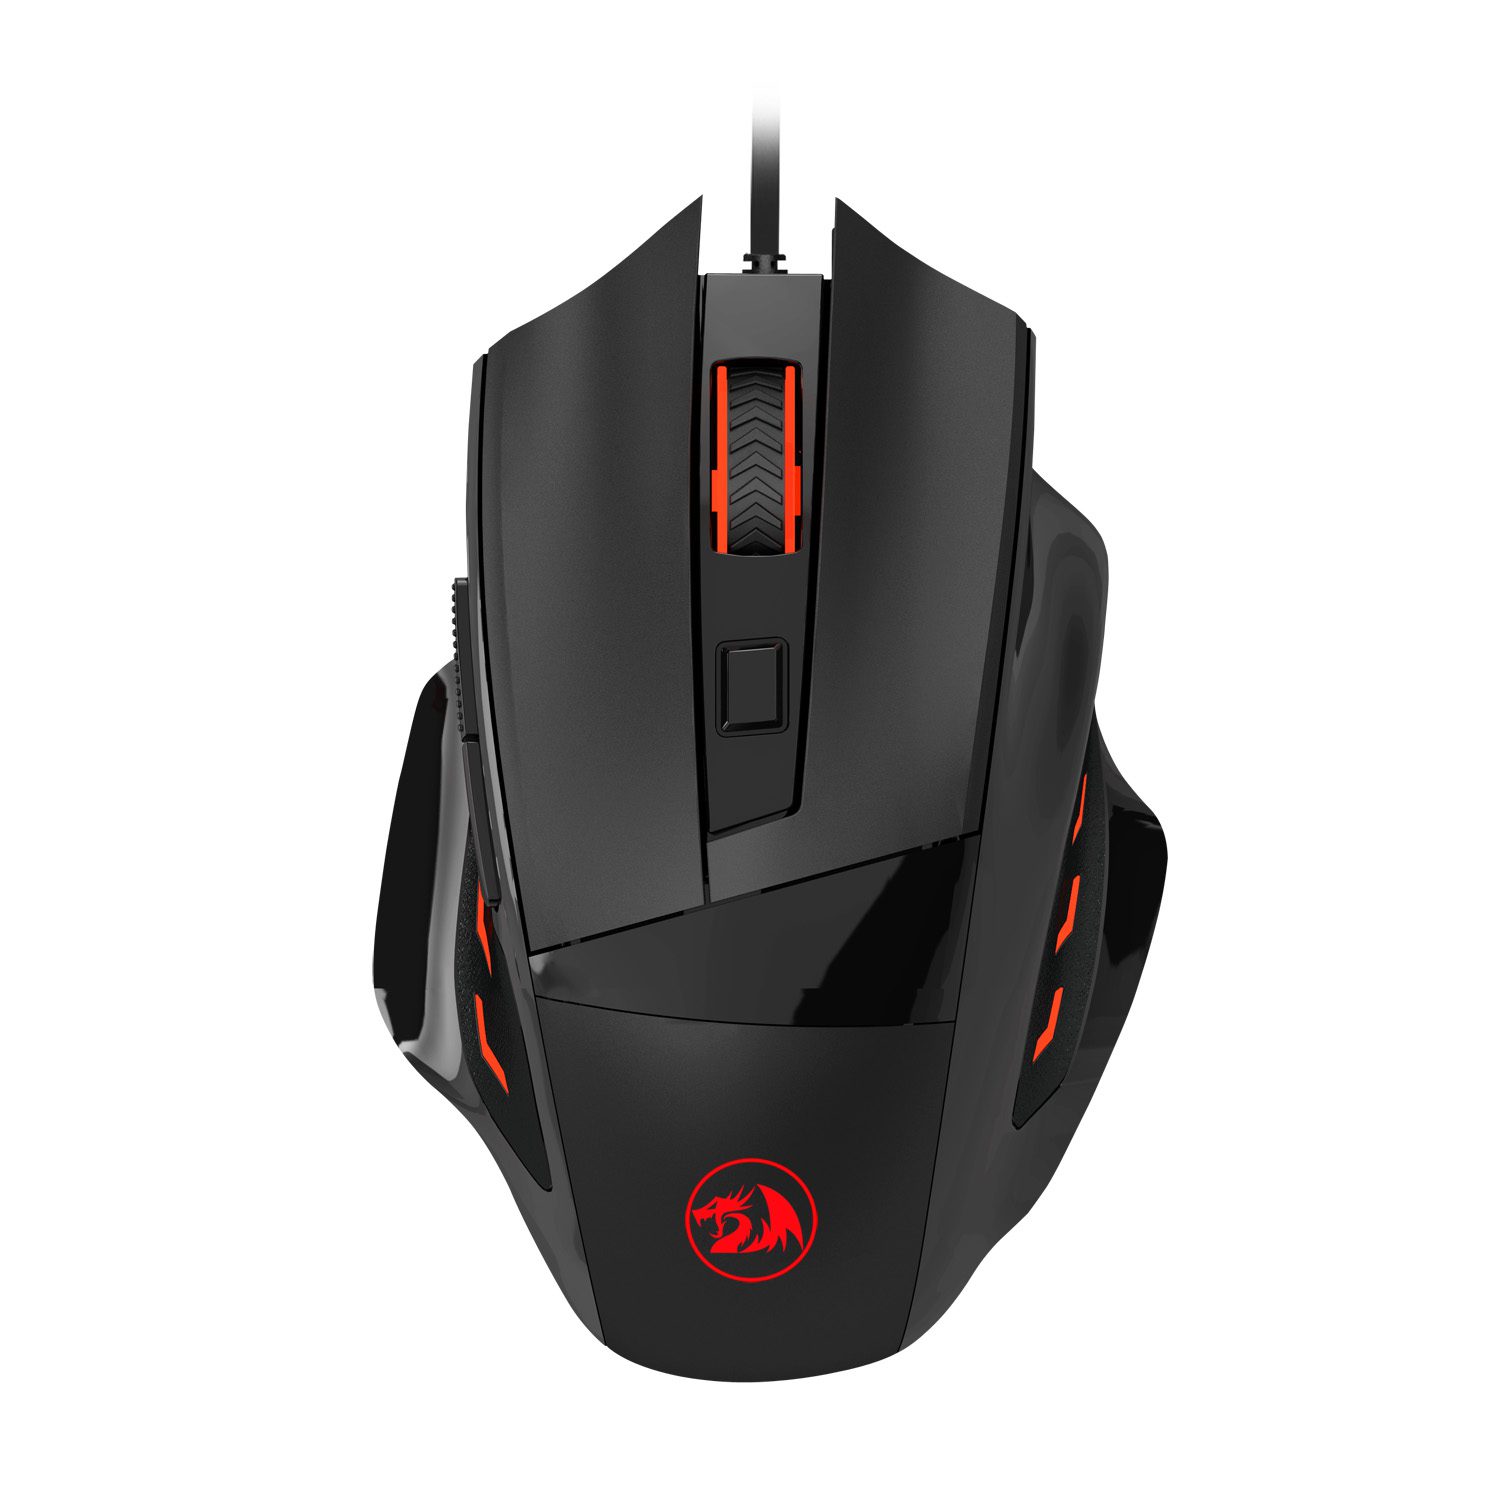 how to download red dragon mouse software